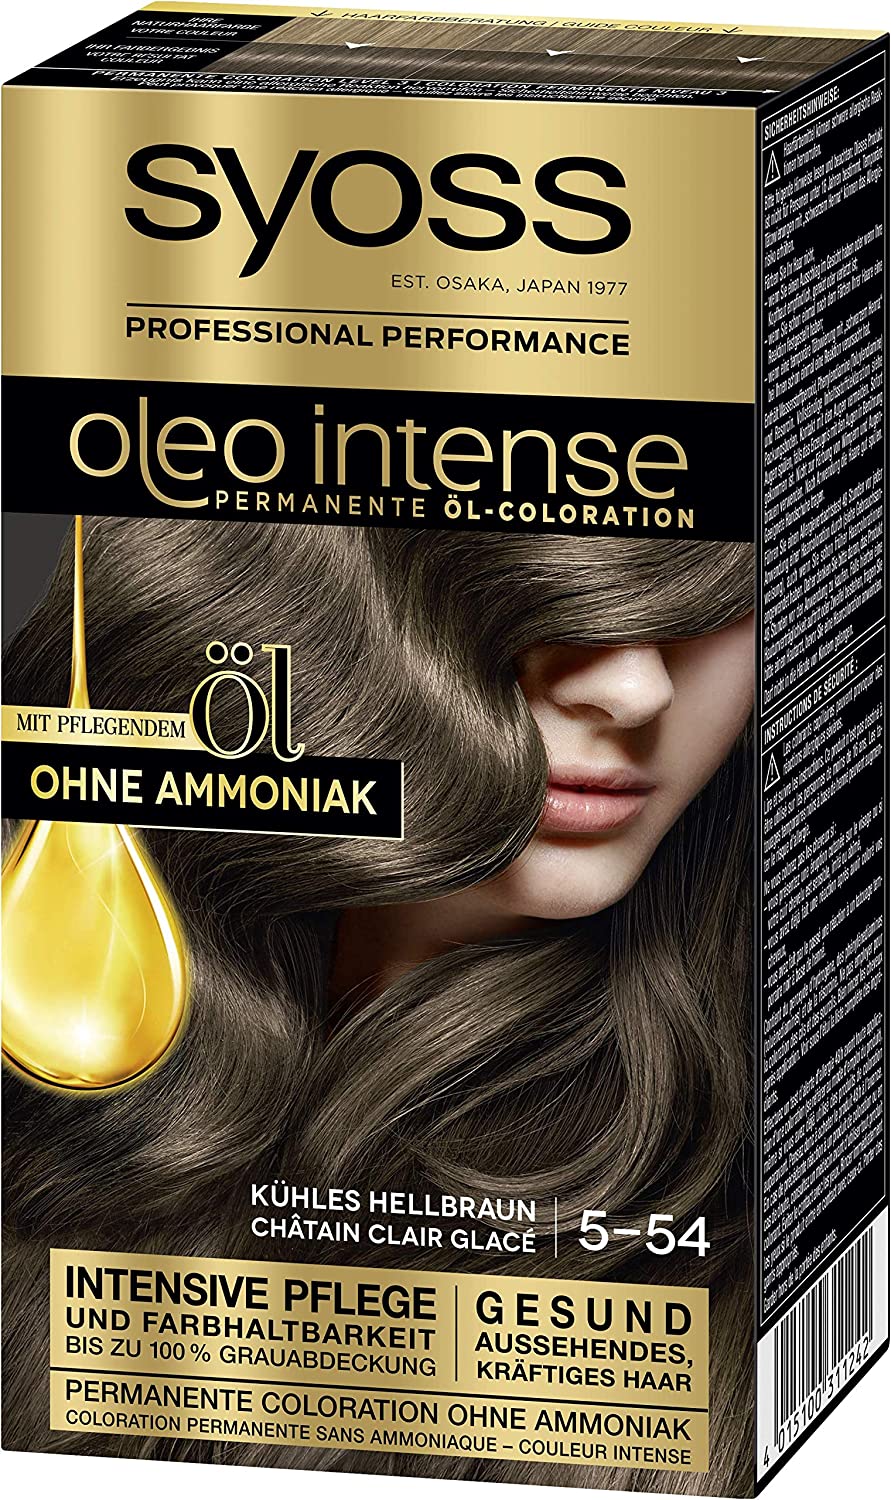 Syoss Oleo Intense Permanent Oil Colouration Hair Colour, 5-54 Cool Light Brown with Nourishing Oil and Ammonia Free, Pack of 3 (3 x 115 ml), ‎cool